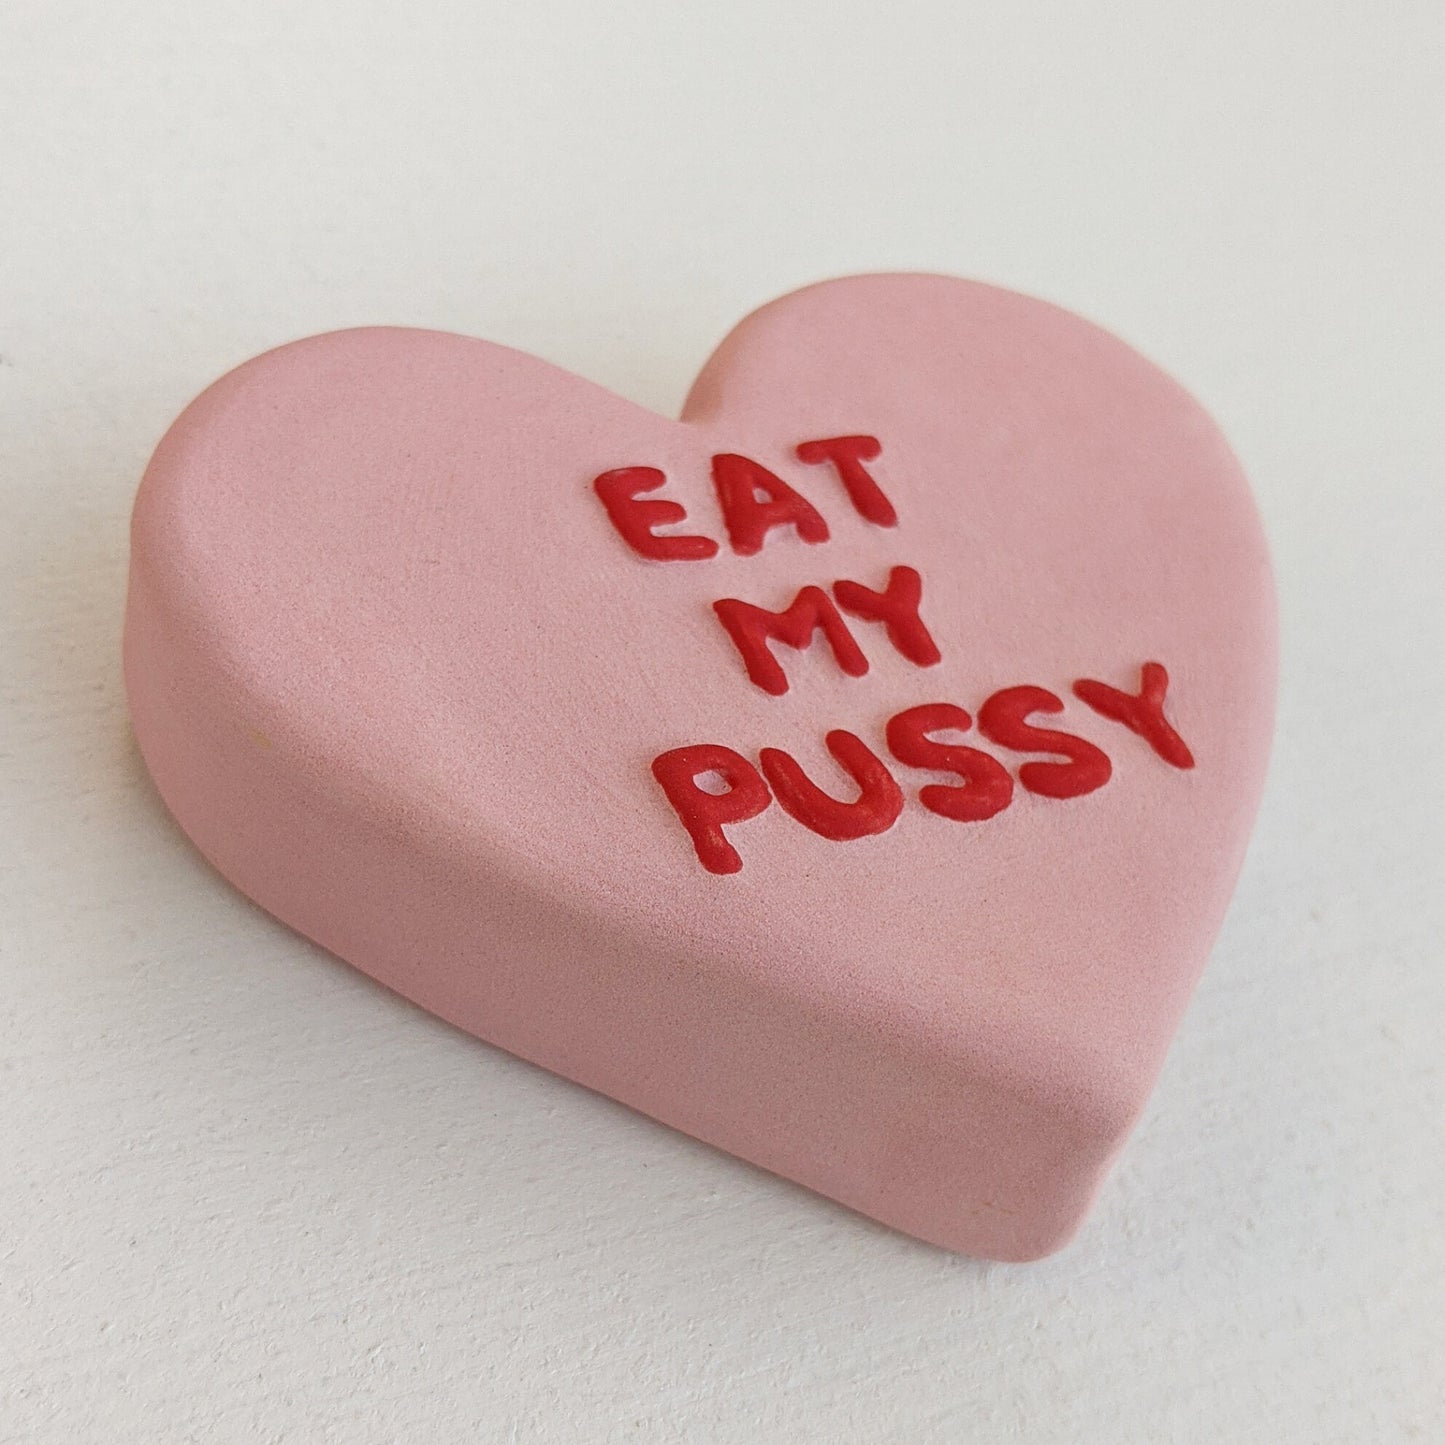 "EAT MY PUSSY" Porcelain Puffy Conversational Heart